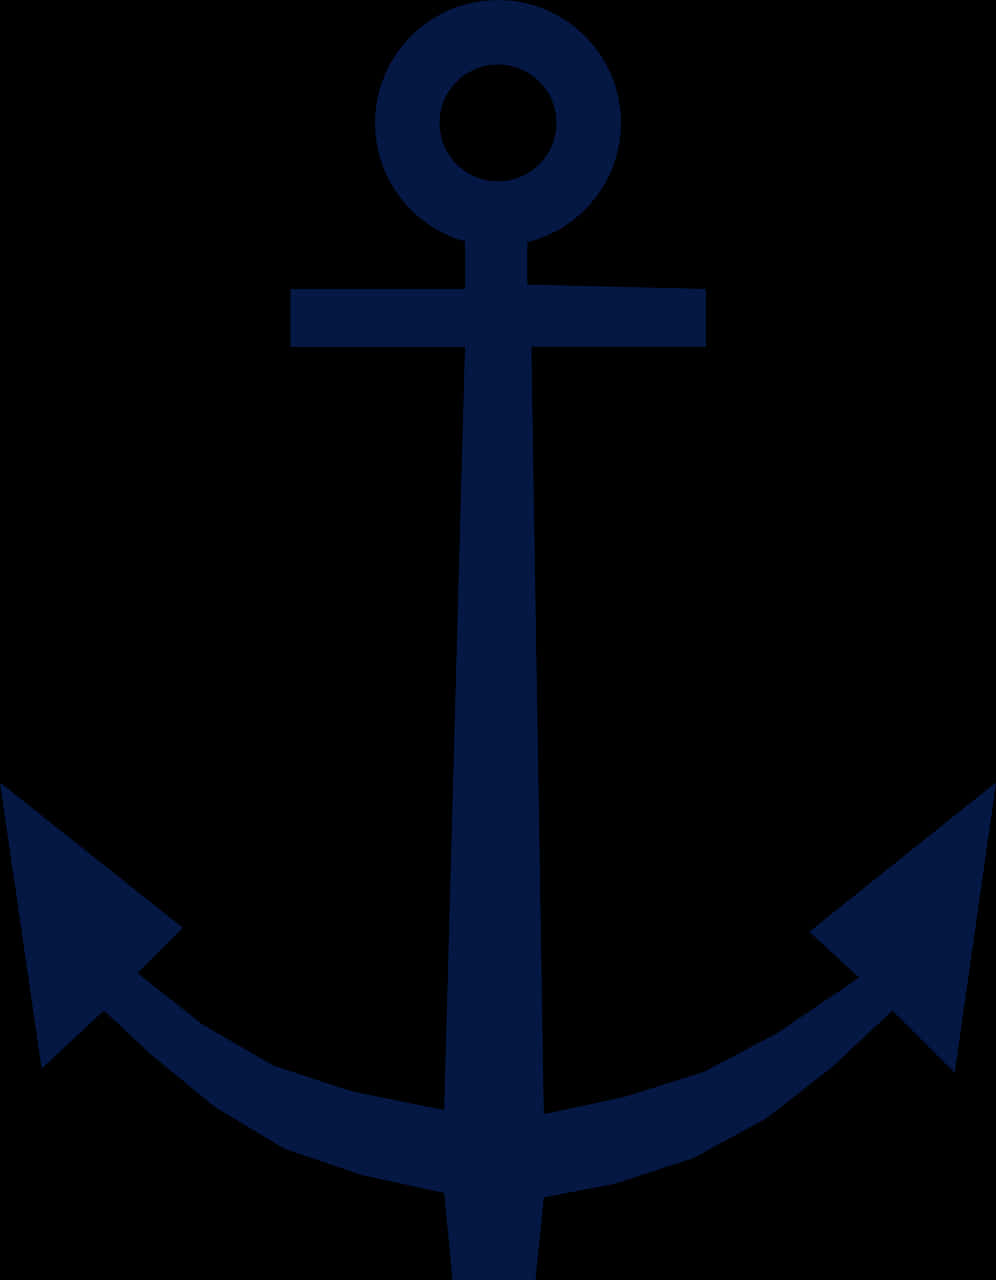 Navy Blue Anchor Graphic